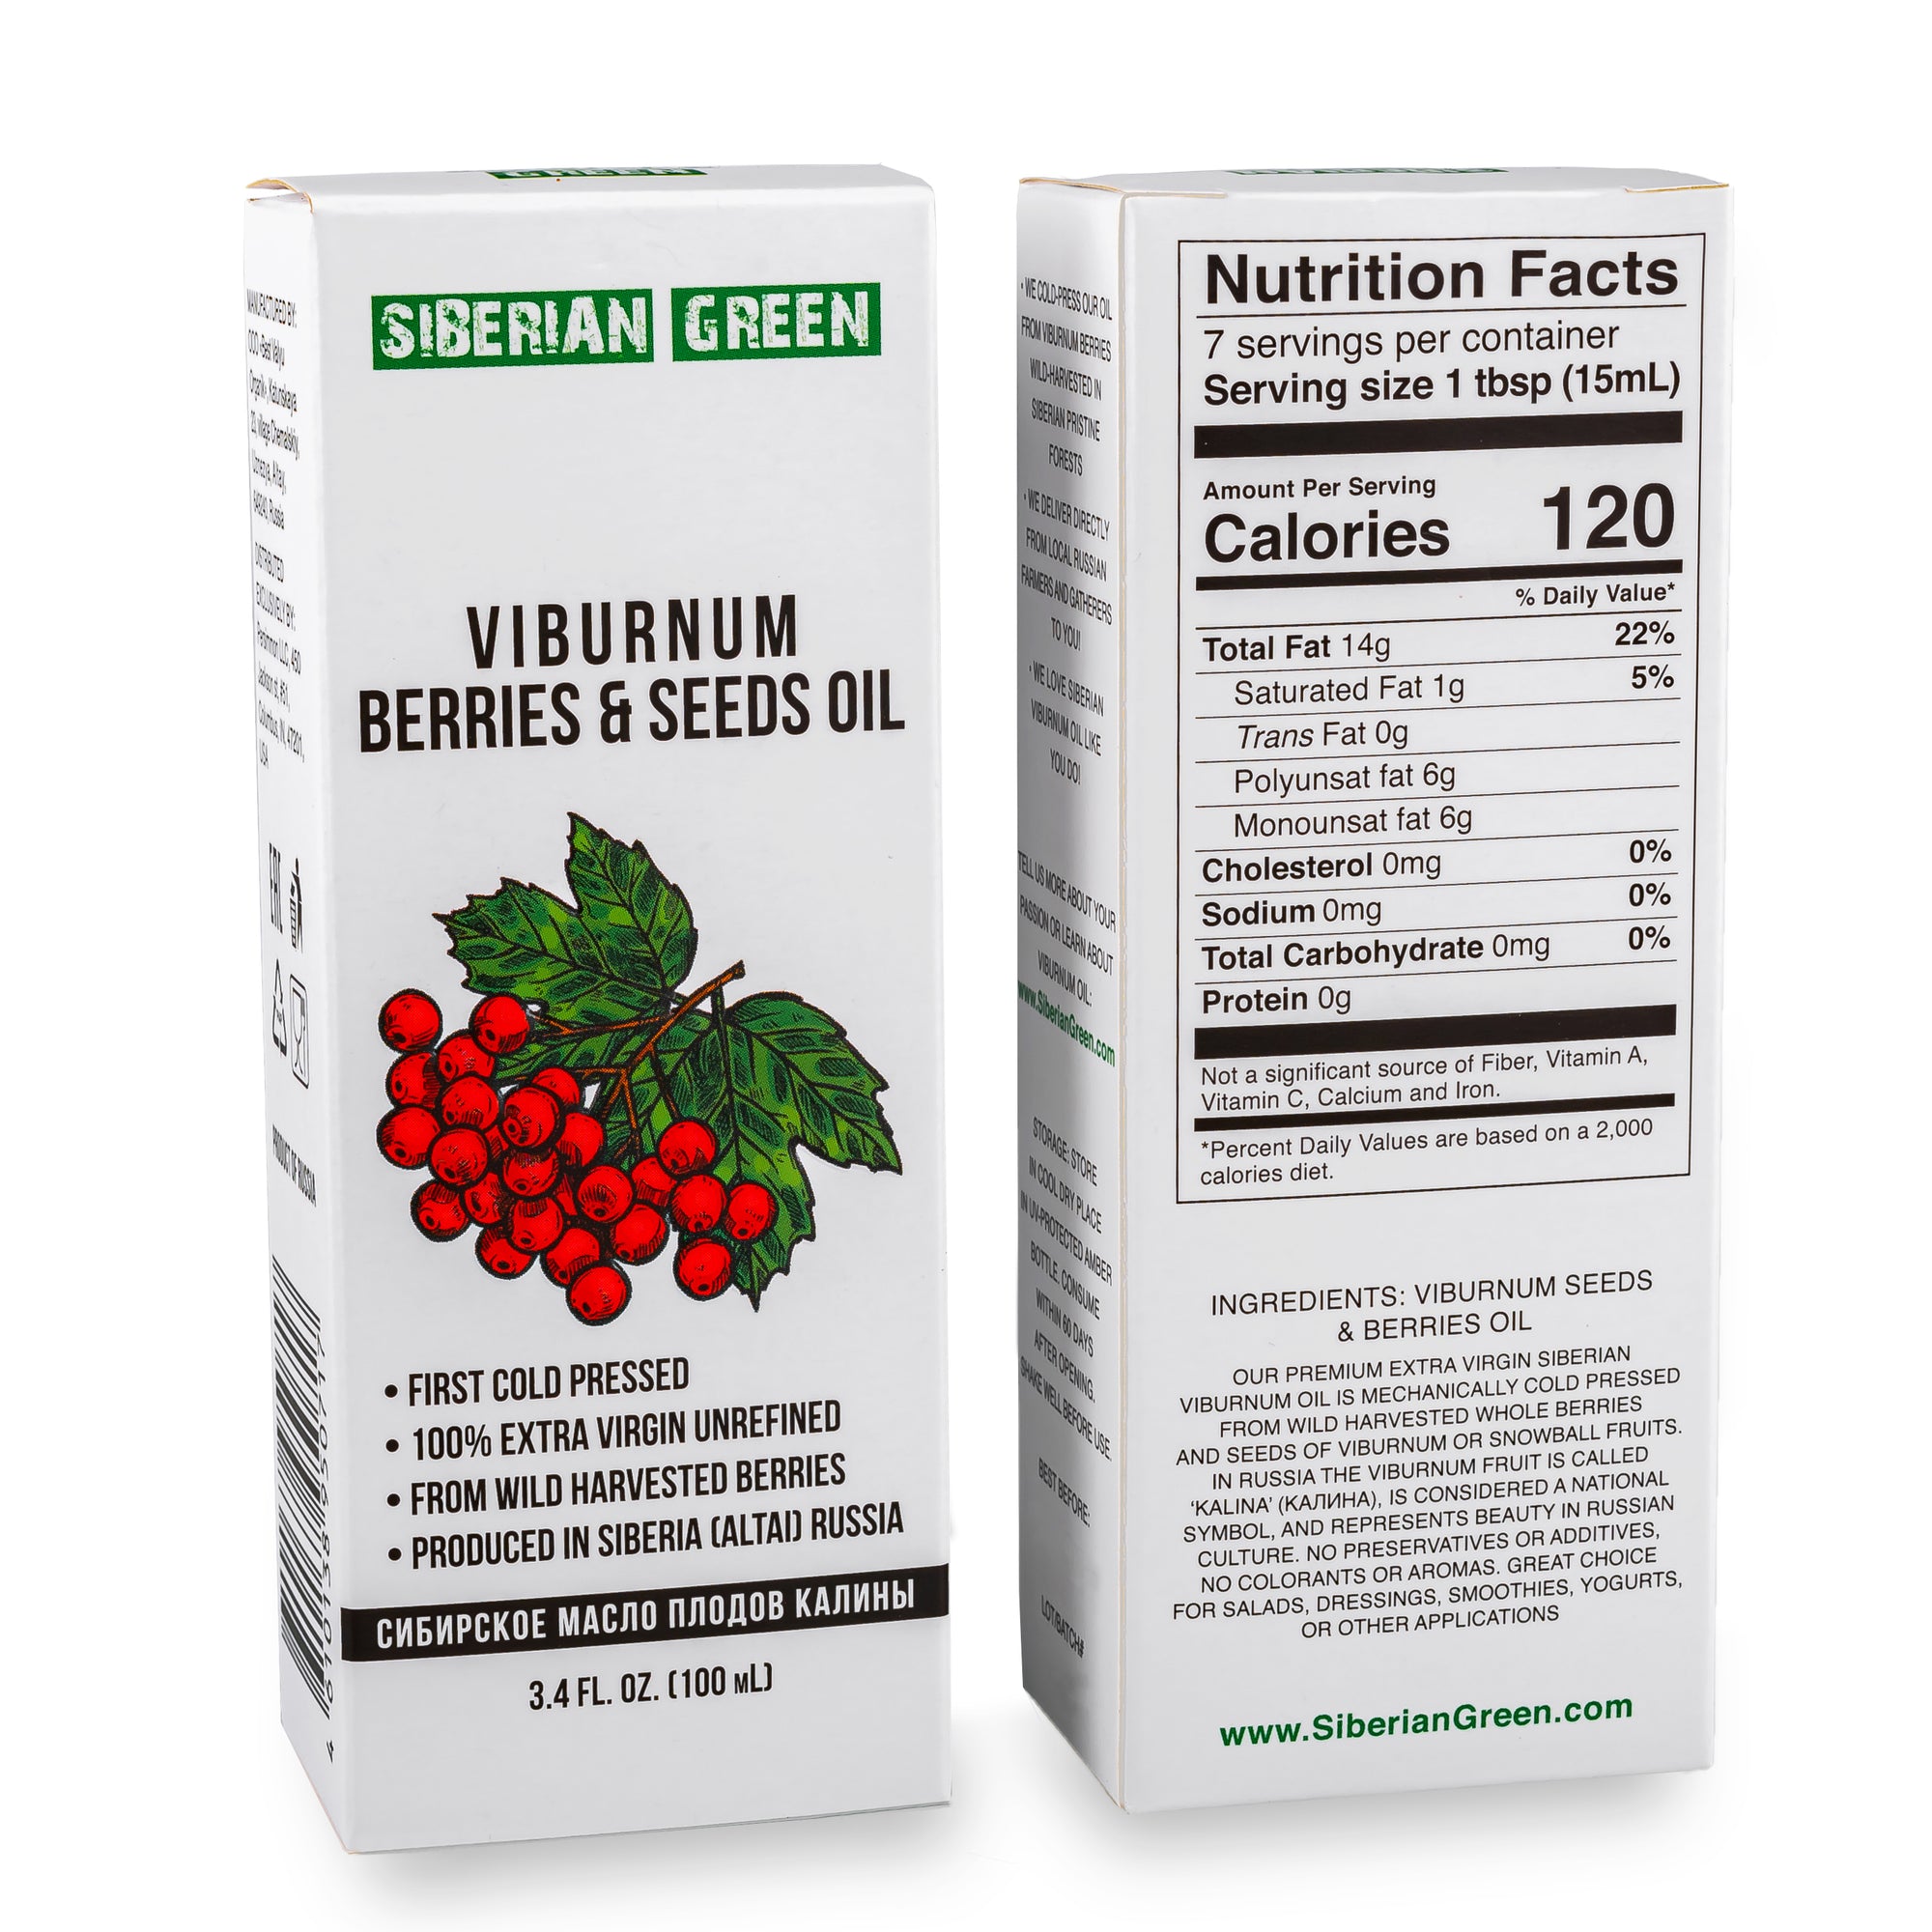 Viburnum Oil: Traditional in Siberia but novelty in the rest of the world. Use in cosmetics